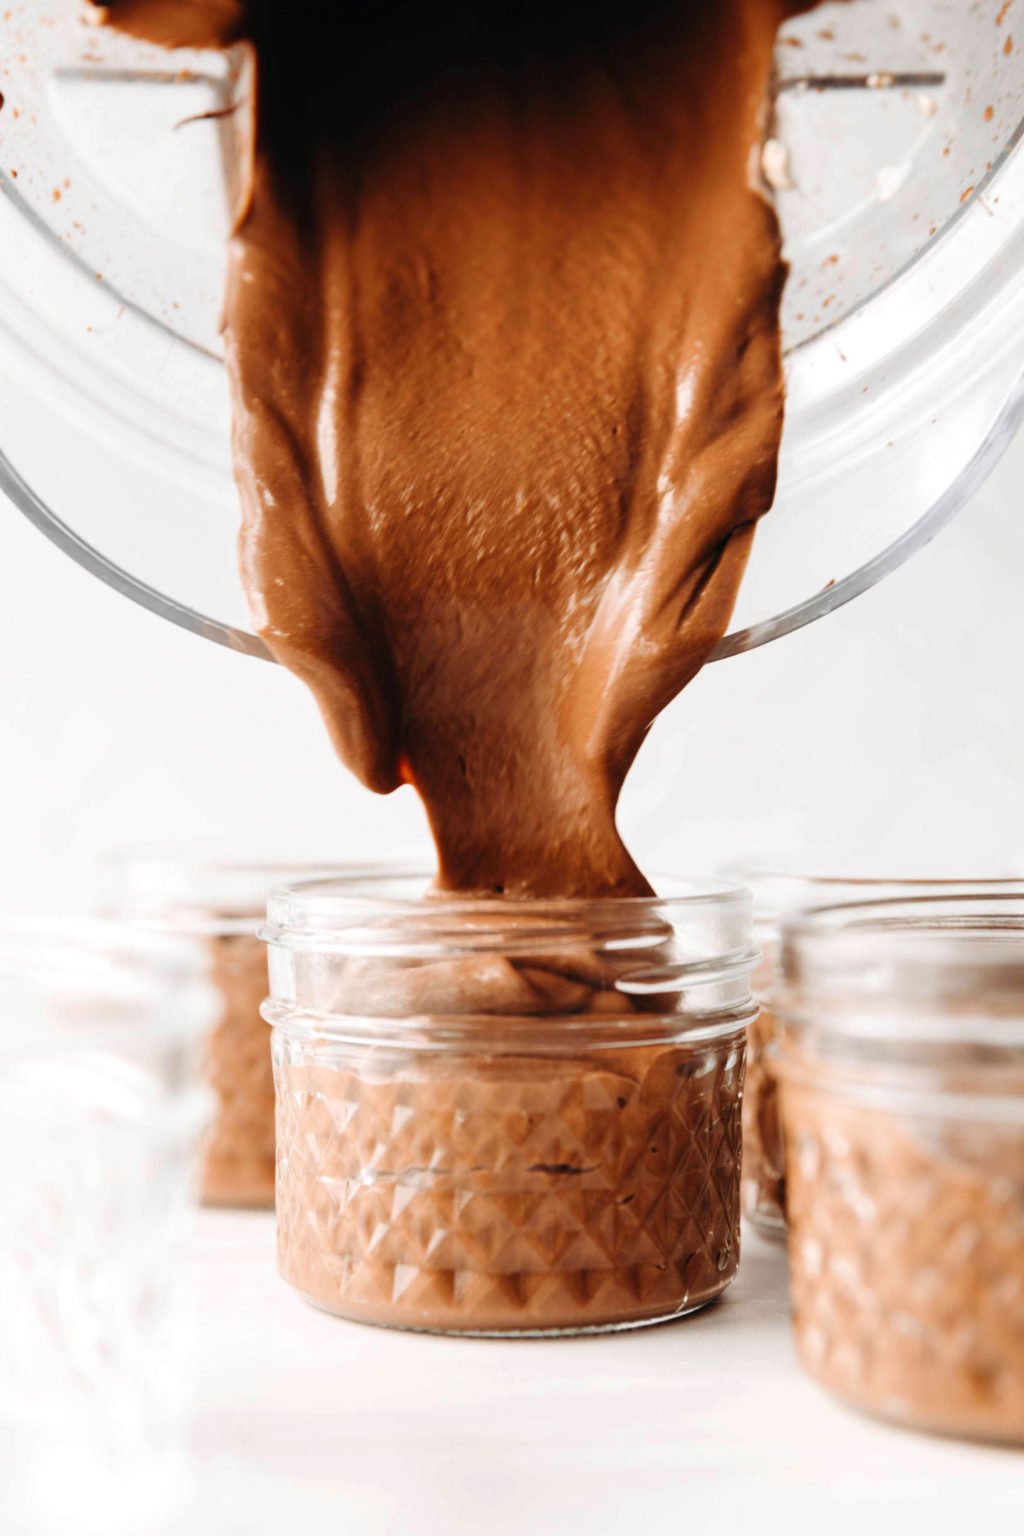 A smooth, blended chocolate pudding mixture is being poured into several small, glass jars.